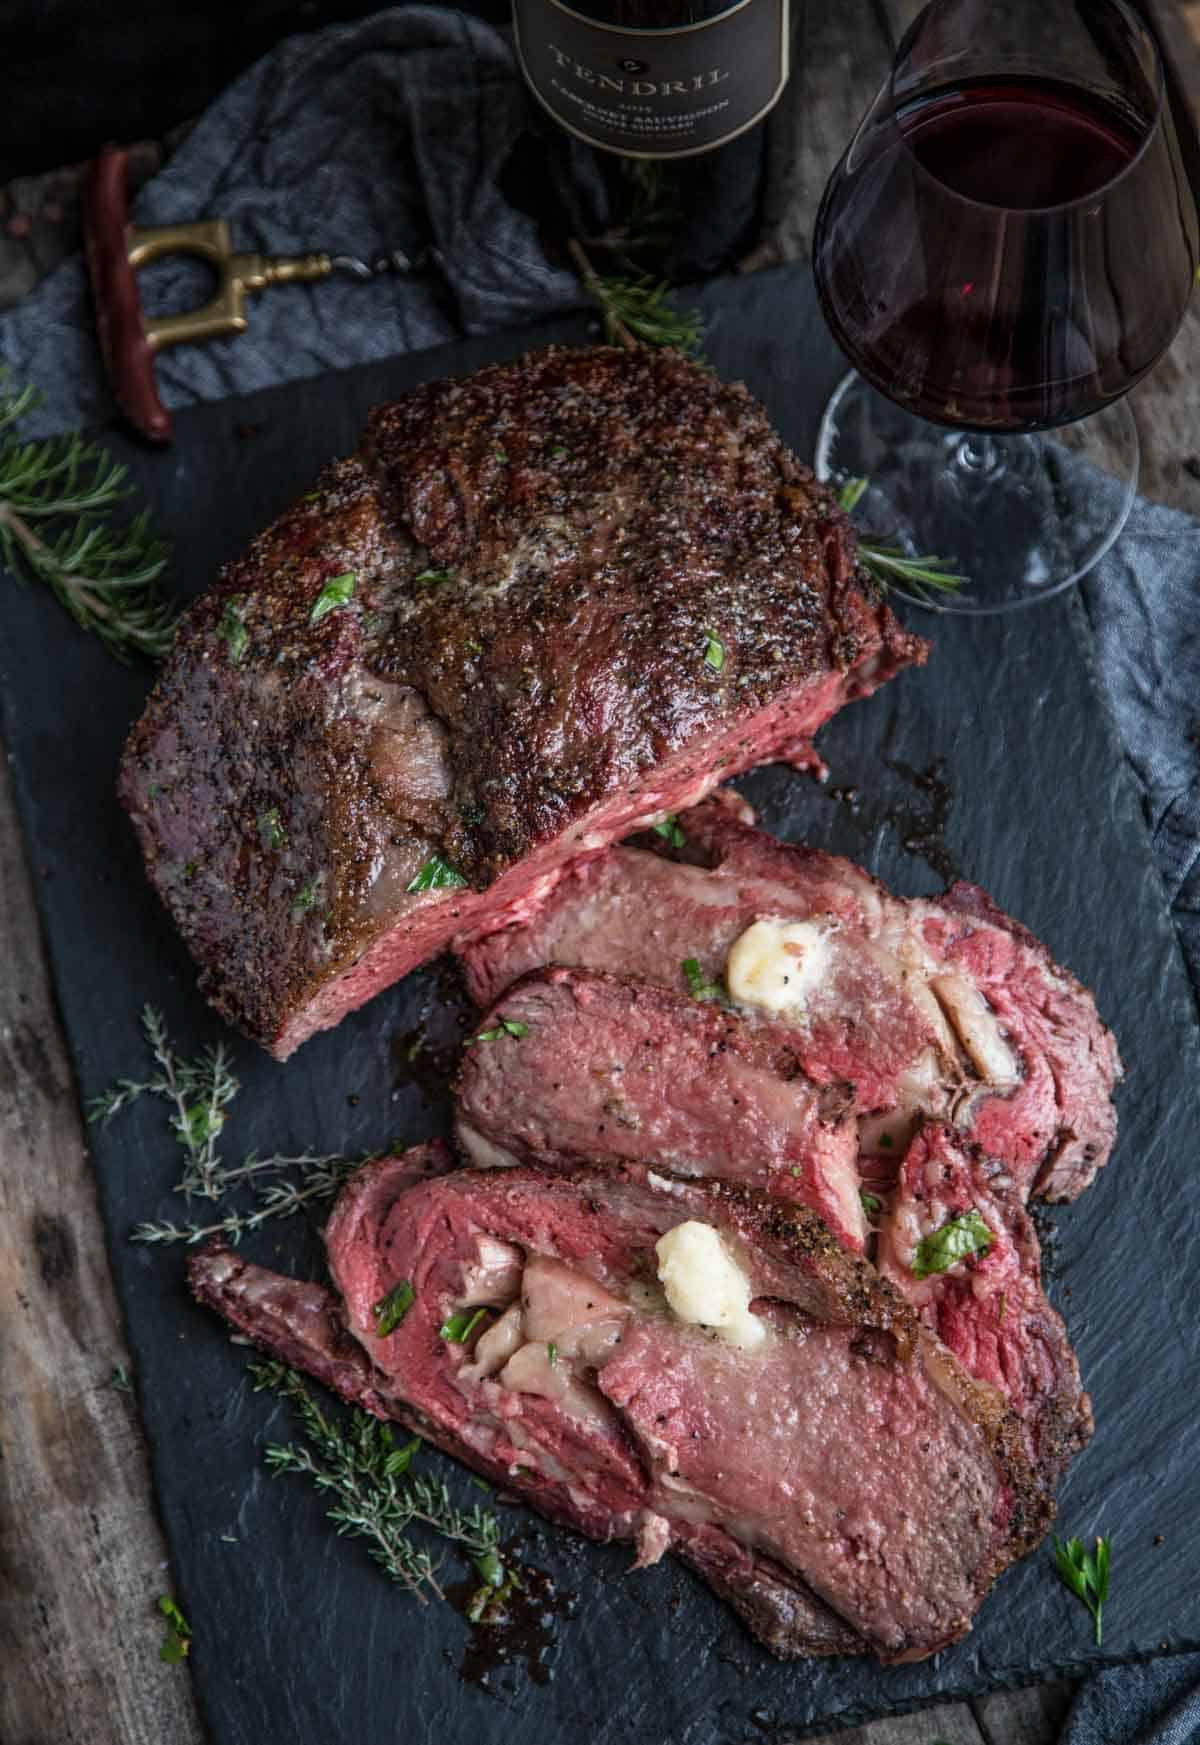 Slices of Prime Rib roast on a slate plate topped with horseradish butter.